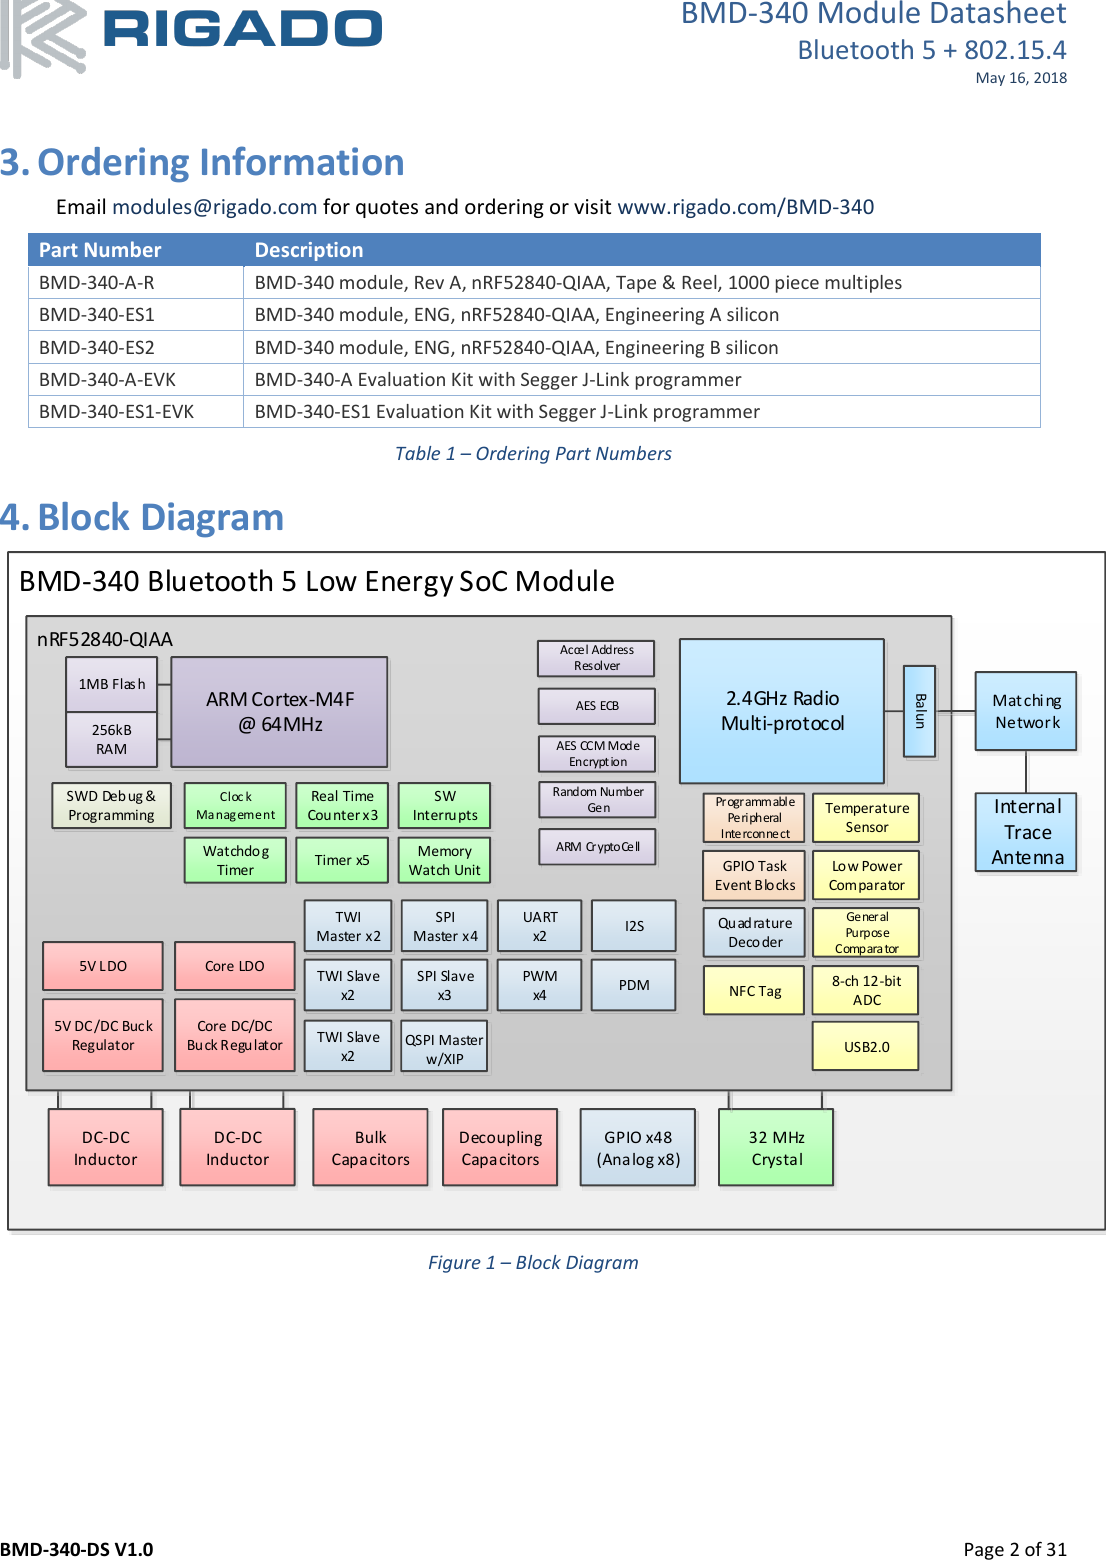 BMD-340 Module Datasheet Bluetooth 5 + 802.15.4 May 16, 2018  BMD-340-DS V1.0      Page 2 of 31 3. Ordering Information Email modules@rigado.com for quotes and ordering or visit www.rigado.com/BMD-340 Part Number Description BMD-340-A-R BMD-340 module, Rev A, nRF52840-QIAA, Tape &amp; Reel, 1000 piece multiples BMD-340-ES1 BMD-340 module, ENG, nRF52840-QIAA, Engineering A silicon BMD-340-ES2 BMD-340 module, ENG, nRF52840-QIAA, Engineering B silicon BMD-340-A-EVK BMD-340-A Evaluation Kit with Segger J-Link programmer BMD-340-ES1-EVK BMD-340-ES1 Evaluation Kit with Segger J-Link programmer Table 1 – Ordering Part Numbers 4. Block Diagram BMD-340 Bluetooth 5 Low Energy SoC Module32 MHz CrystalnRF52840-QIAA1MB FlashDC-DC InductorDecoupling CapacitorsBulk Capacitors2.4GHz RadioMulti-protocolTWI Master x2SPI Master x4SPI Slavex3Core DC/DC Buck RegulatorCore LDO256kB RAMLow Power Comparator8-ch 12-bit ADCUARTx2 Quadrature DecoderSWD Debug &amp; Programming  Temperature SensorCloc k ManagementWatchdog TimerRandom Number GenTimer x5Accel Address ResolverAES CCM Mode EncryptionAES ECBReal Time Counter x3GPIO Task Event BlocksProgrammable Peripheral InterconnectARM Cortex-M4F@ 64MHzMatching NetworkInternal Trace AntennaGPIO x48(Analog x8)I2STWI Slave x2PWMx4 PDMGeneral Purpose ComparatorNFC TagBalunDC-DC Inductor5V DC/DC Buck Regulator TWI Slave x2 QSPI Masterw/XIP USB2.05V LDOARM CryptoCellSW InterruptsMemory Watch Unit Figure 1 – Block Diagram    